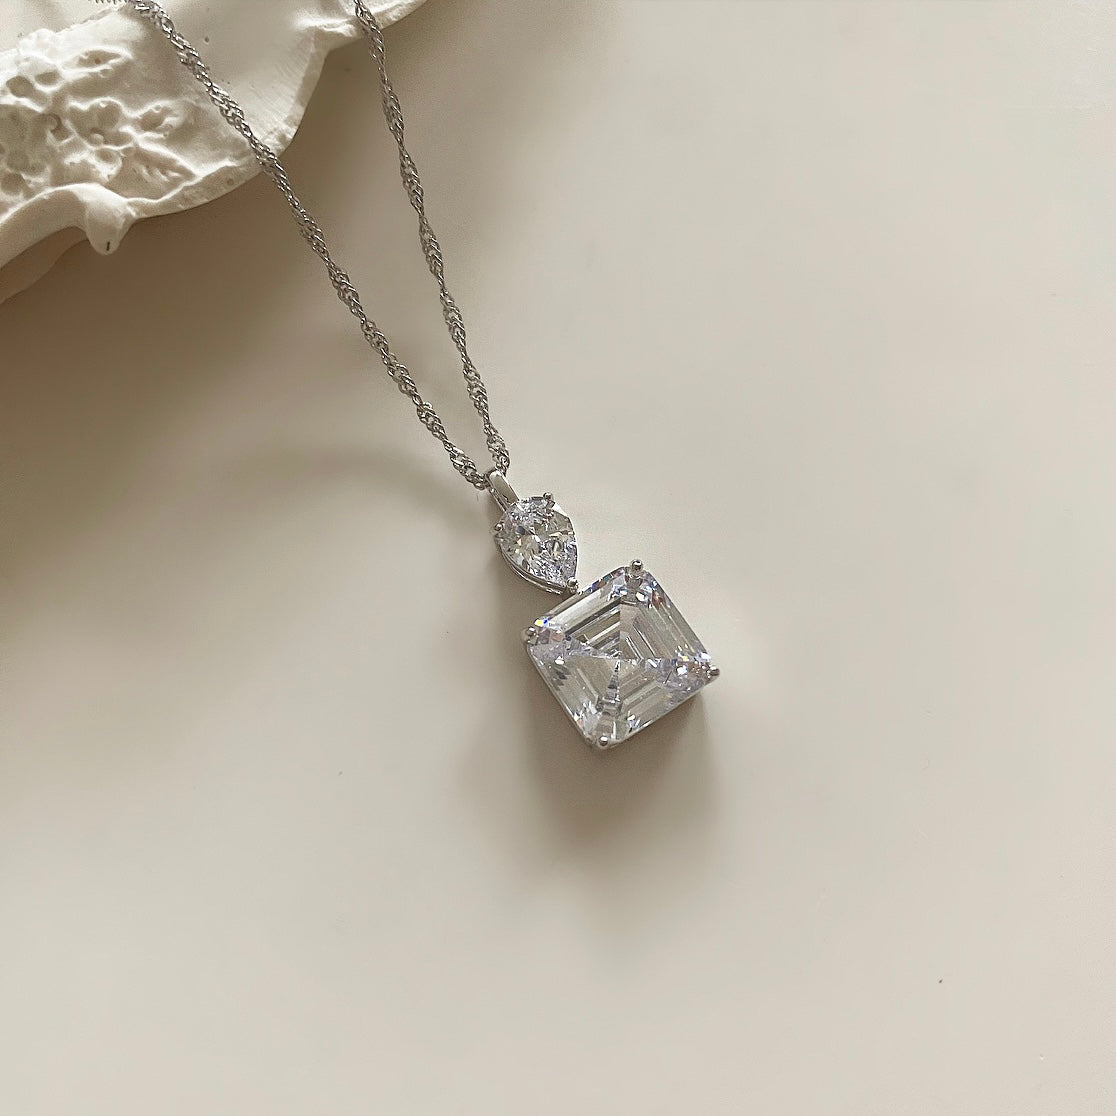 This beautiful Sterling Silver necklace features stunning crystal zirconia that will sparkle and shine all day. Expertly cut and polished to a high luster, the zirconia makes a bold statement without sacrificing comfort and elegance. Perfect for any occasion. Pair with crystal earrings for a complete look.  Necklace drop 23cm